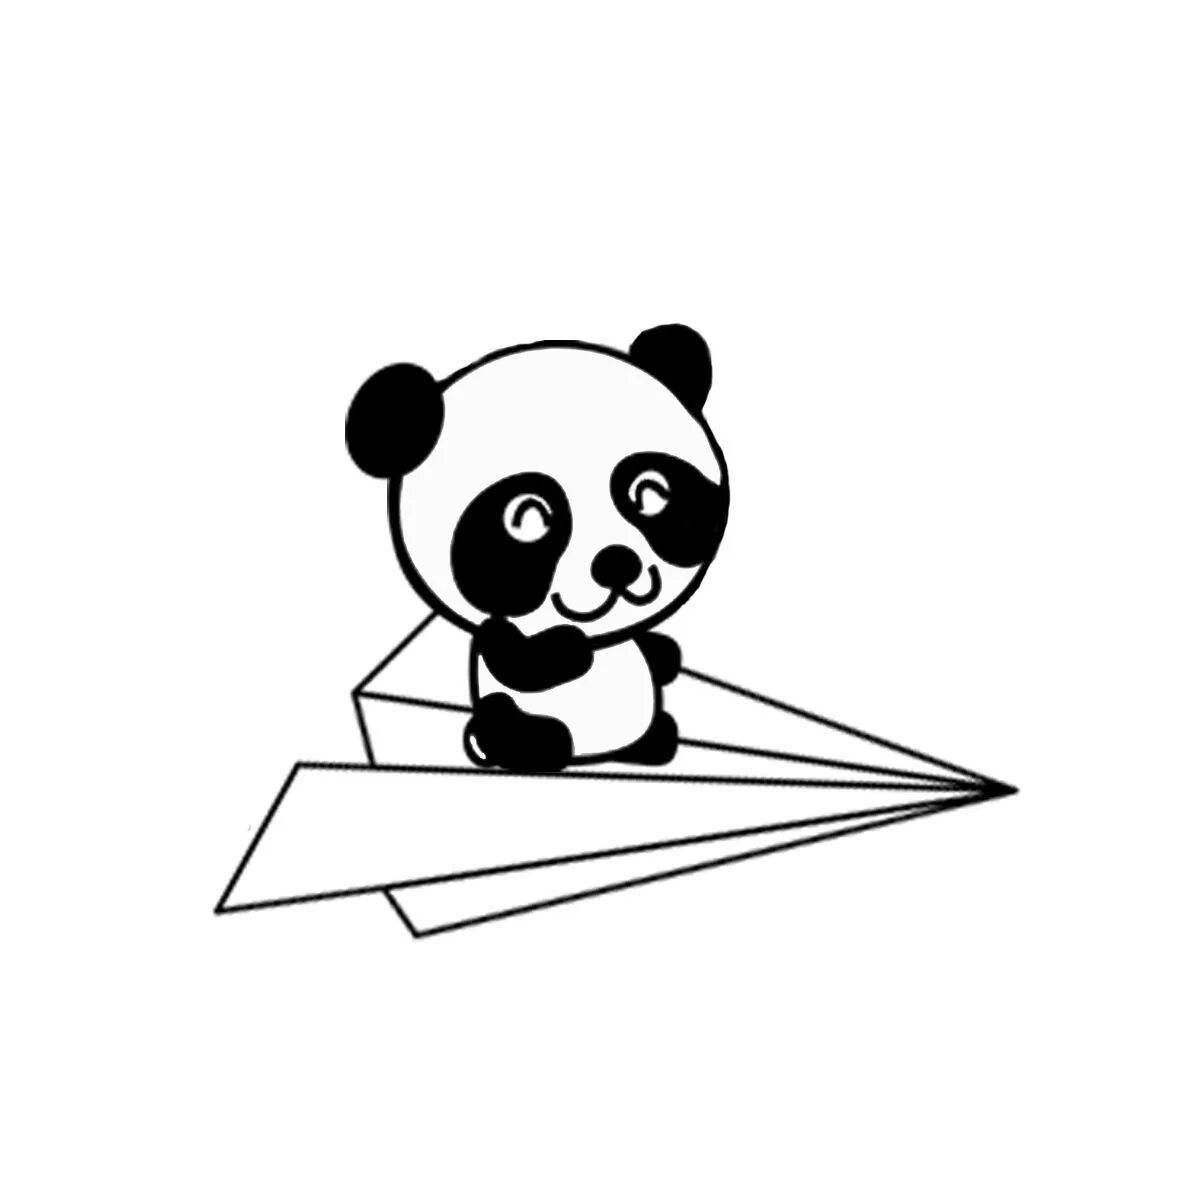 Fabulous panda coloring pages for kids